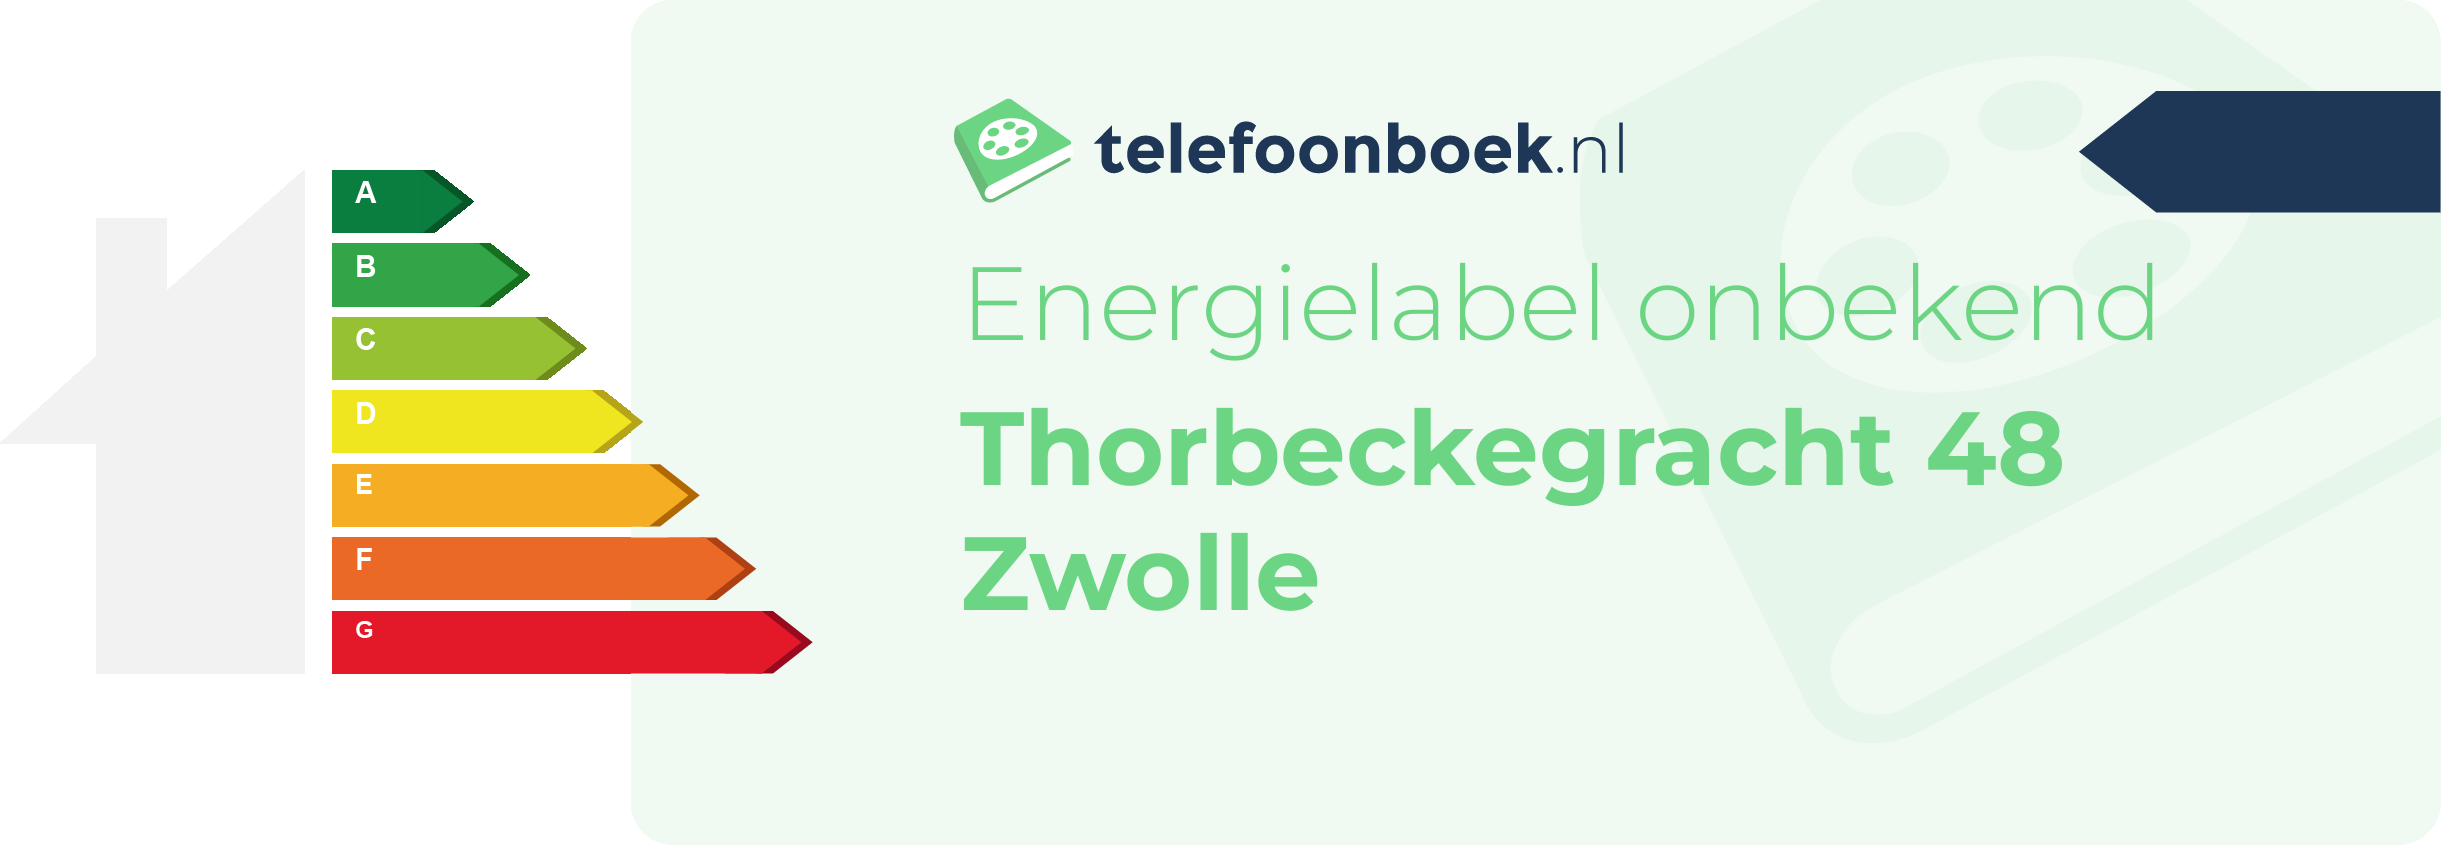 Energielabel Thorbeckegracht 48 Zwolle